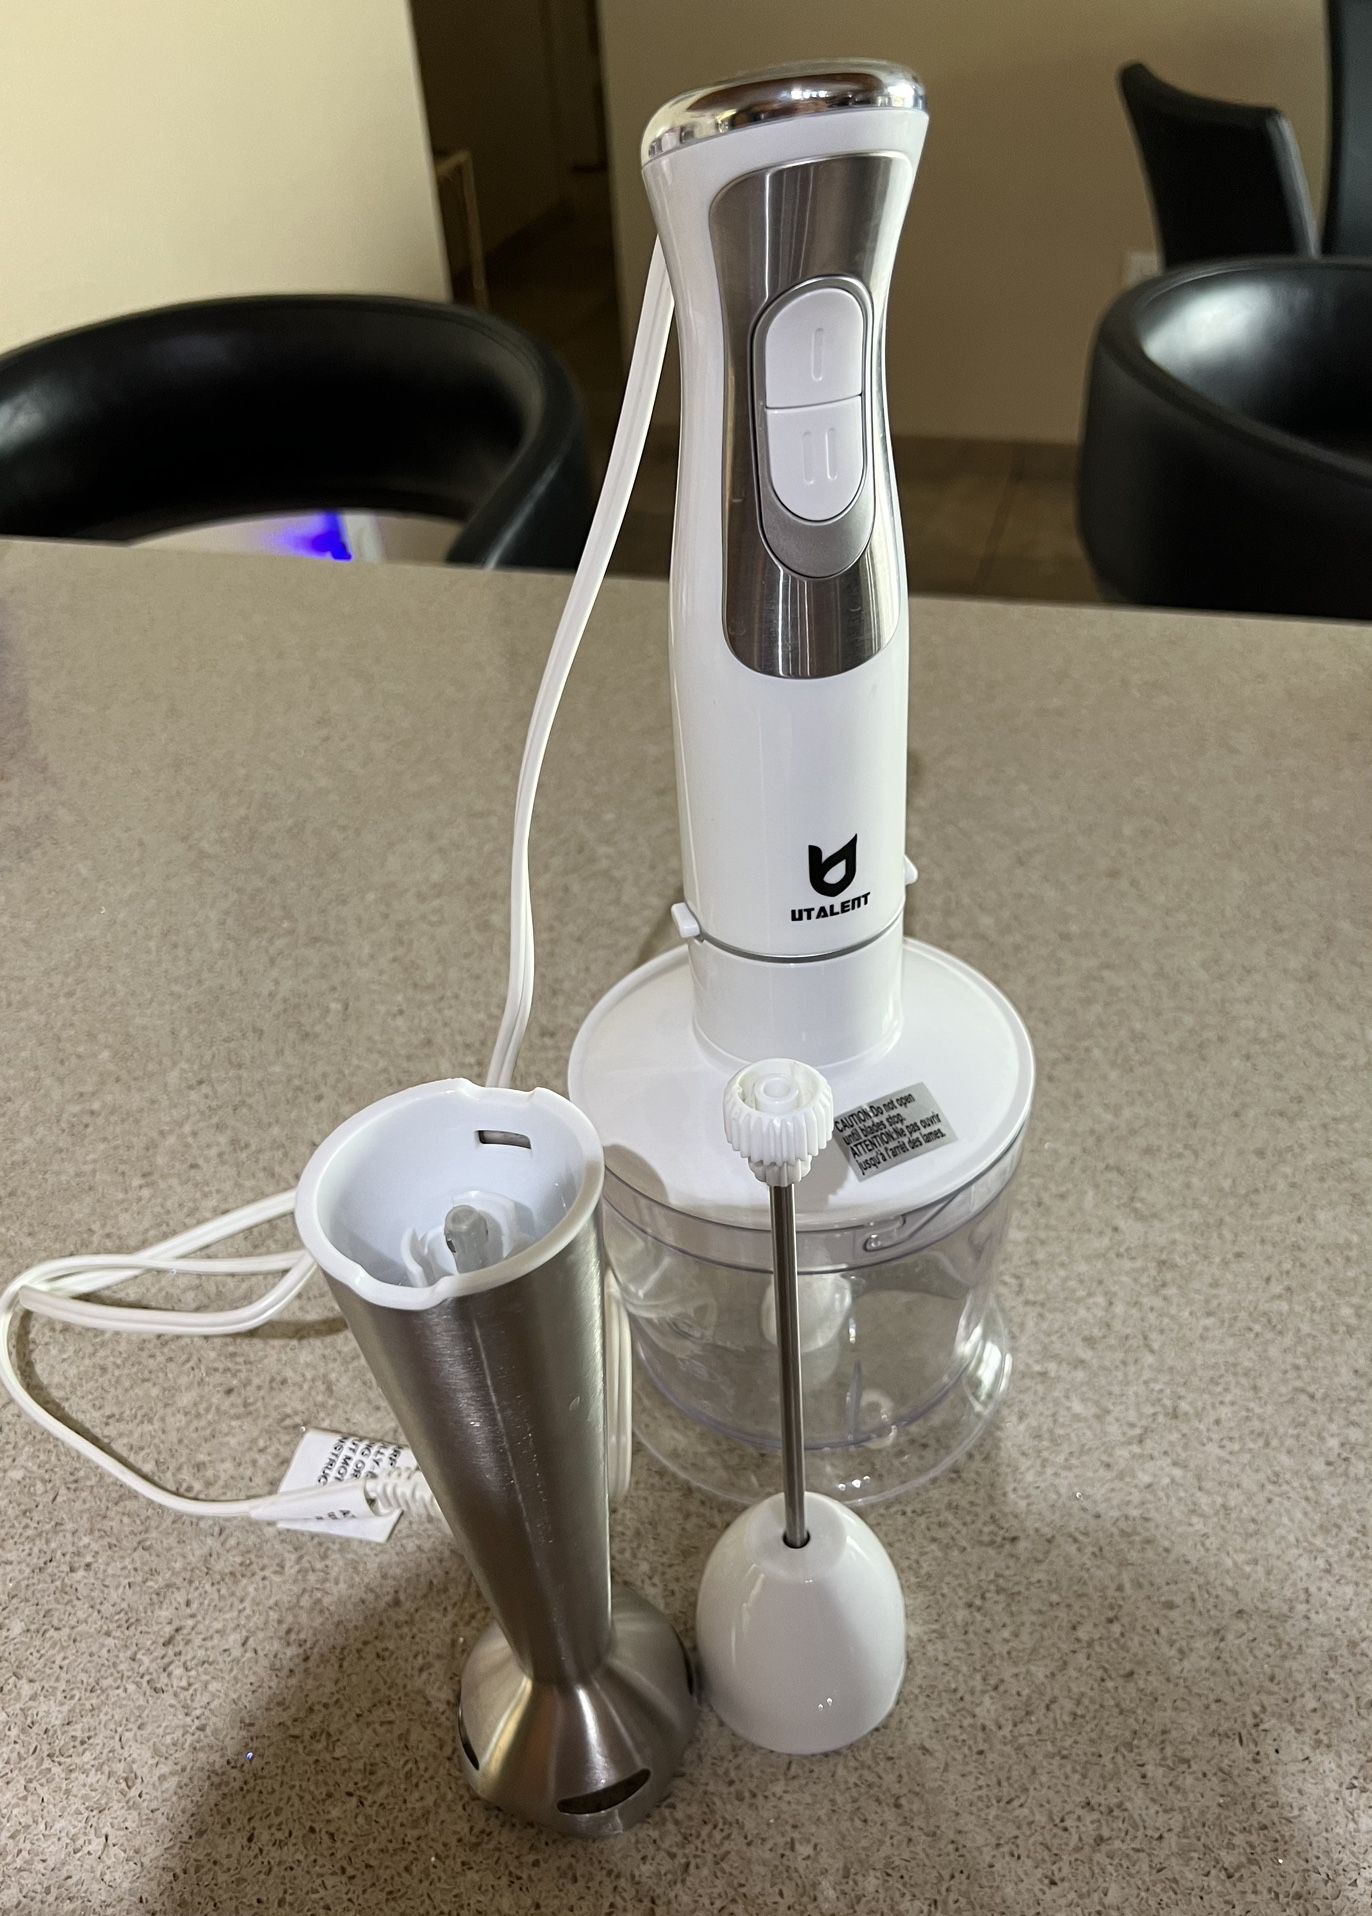 Immersion Hand Blender, UTALENT 5-in-1 8-Speed Stick Blender with 500ml  Food Grinder, BPA-Free, 600ml Container for Sale in Santee, CA - OfferUp